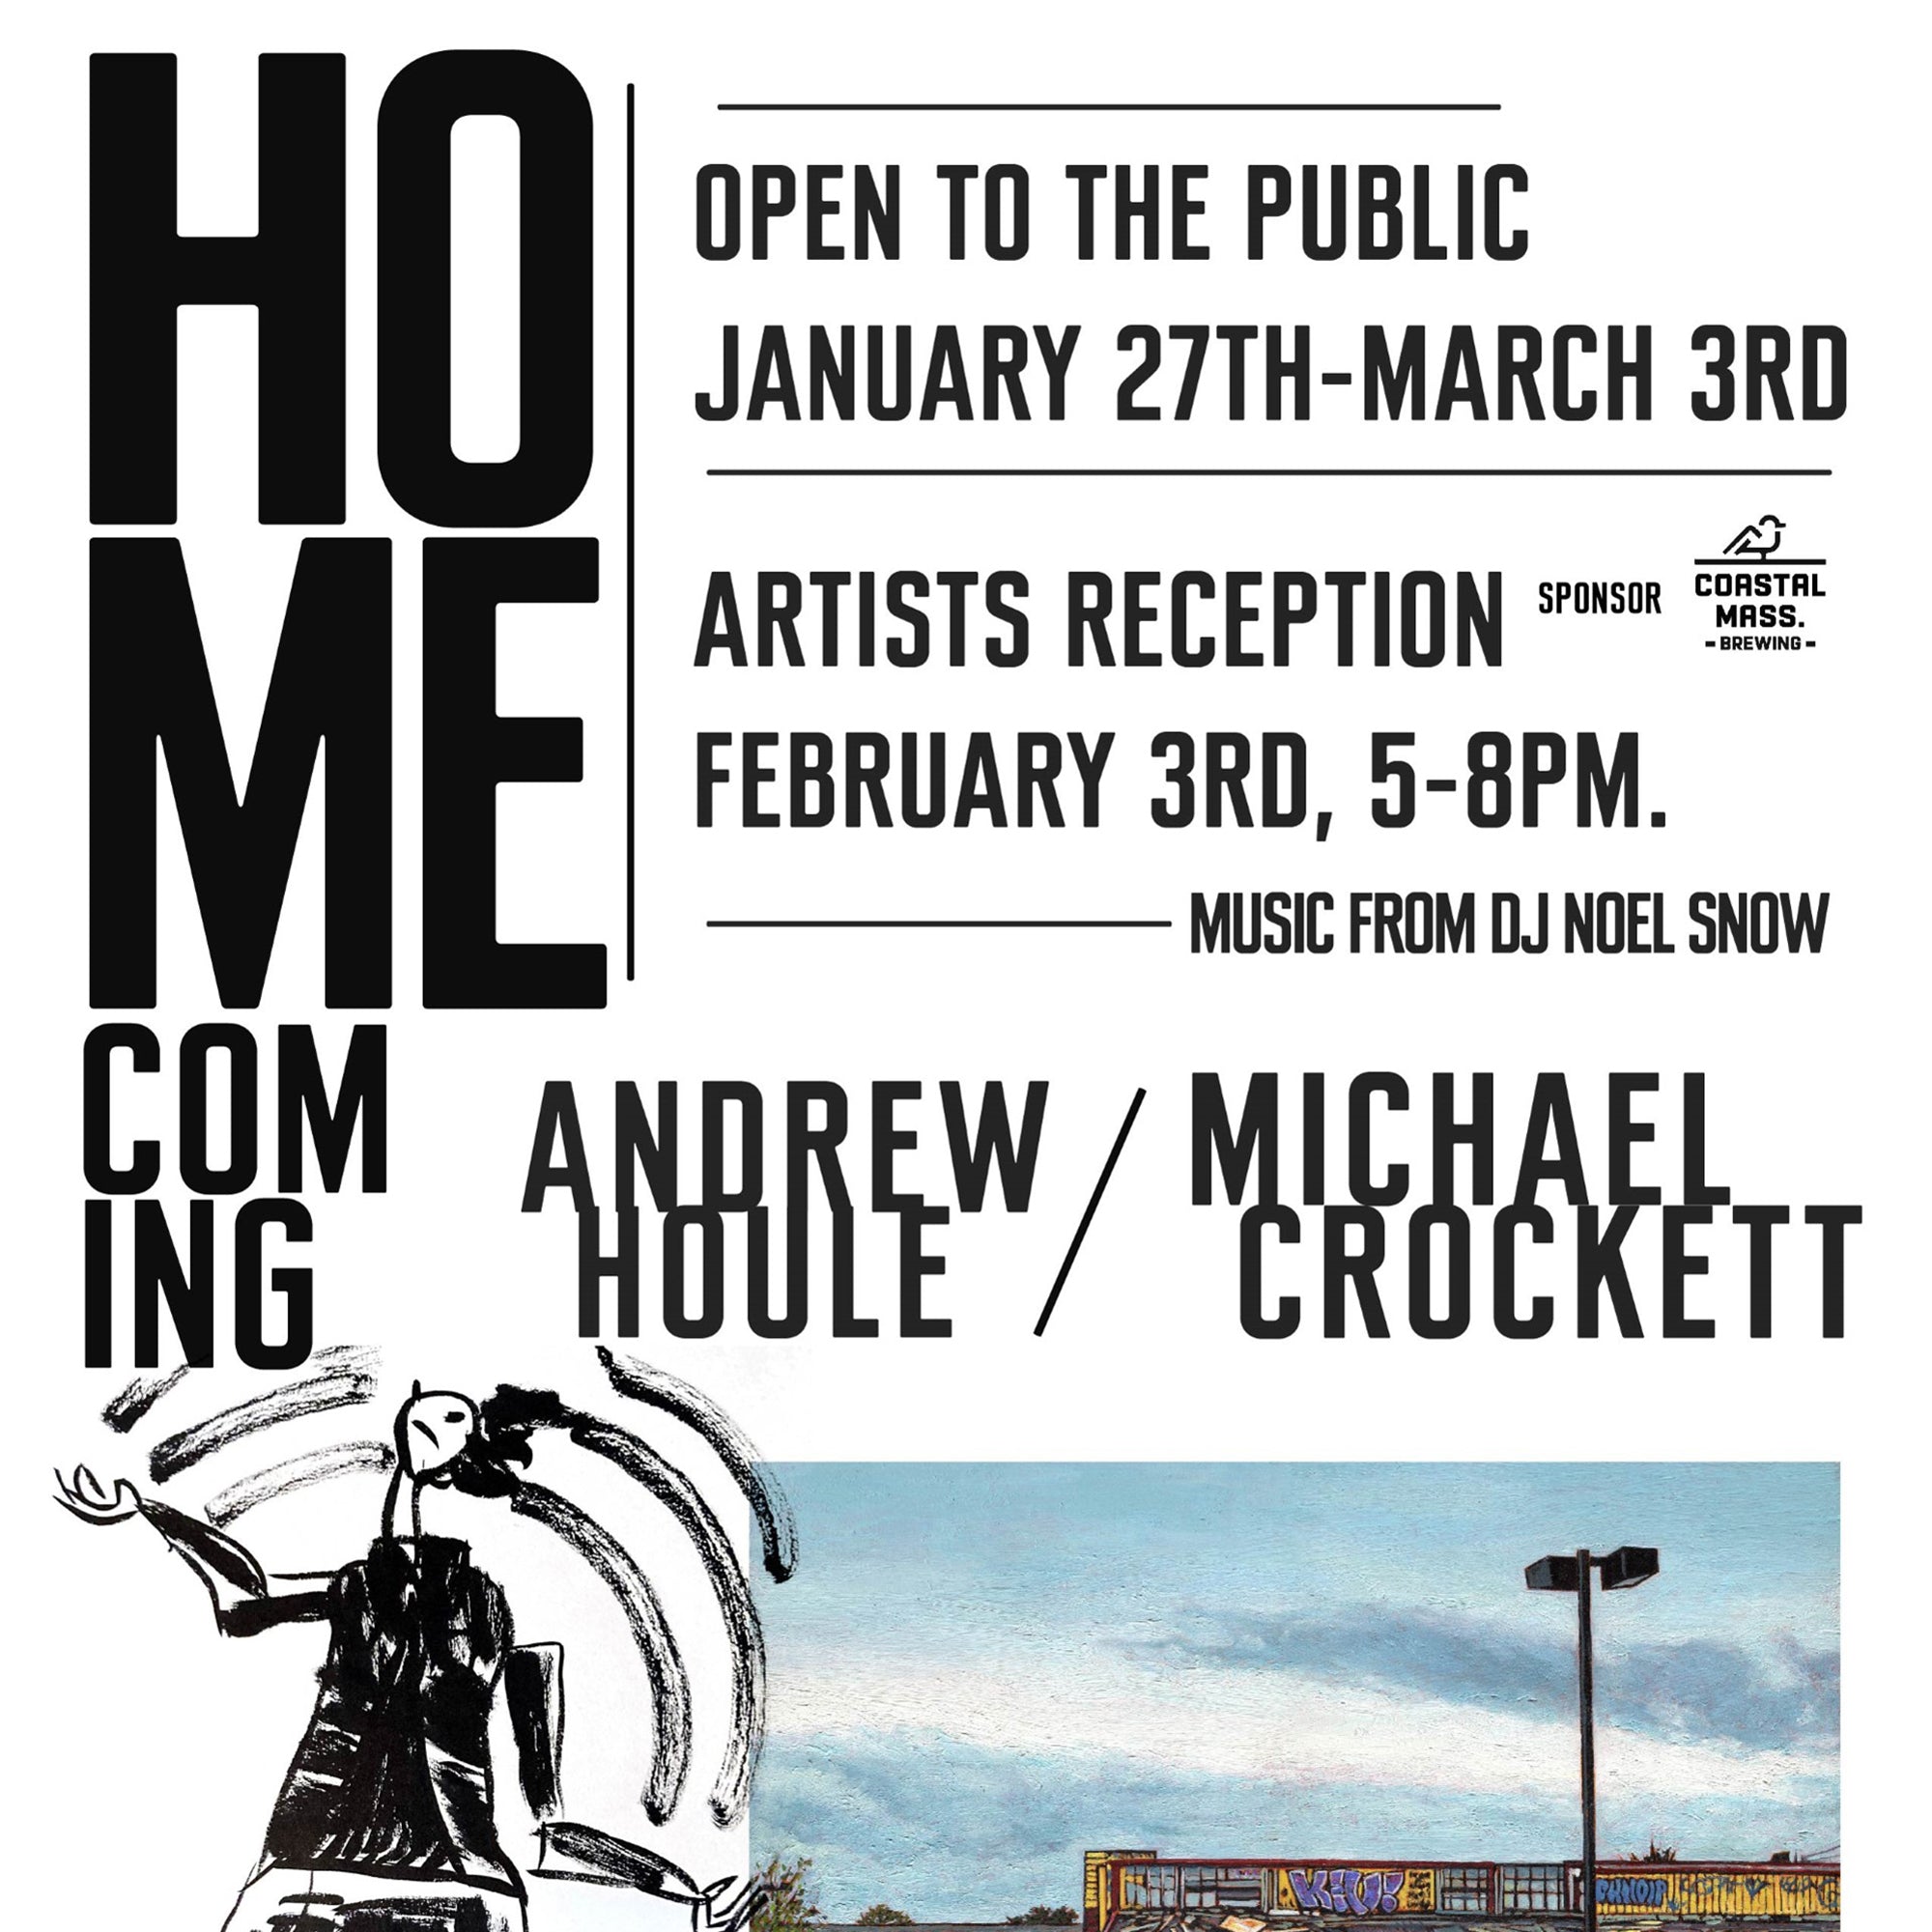 Andrew Houle & Michael Crockett: "HOMECOMING" Exhibit at Curation 250, Lowell, MA